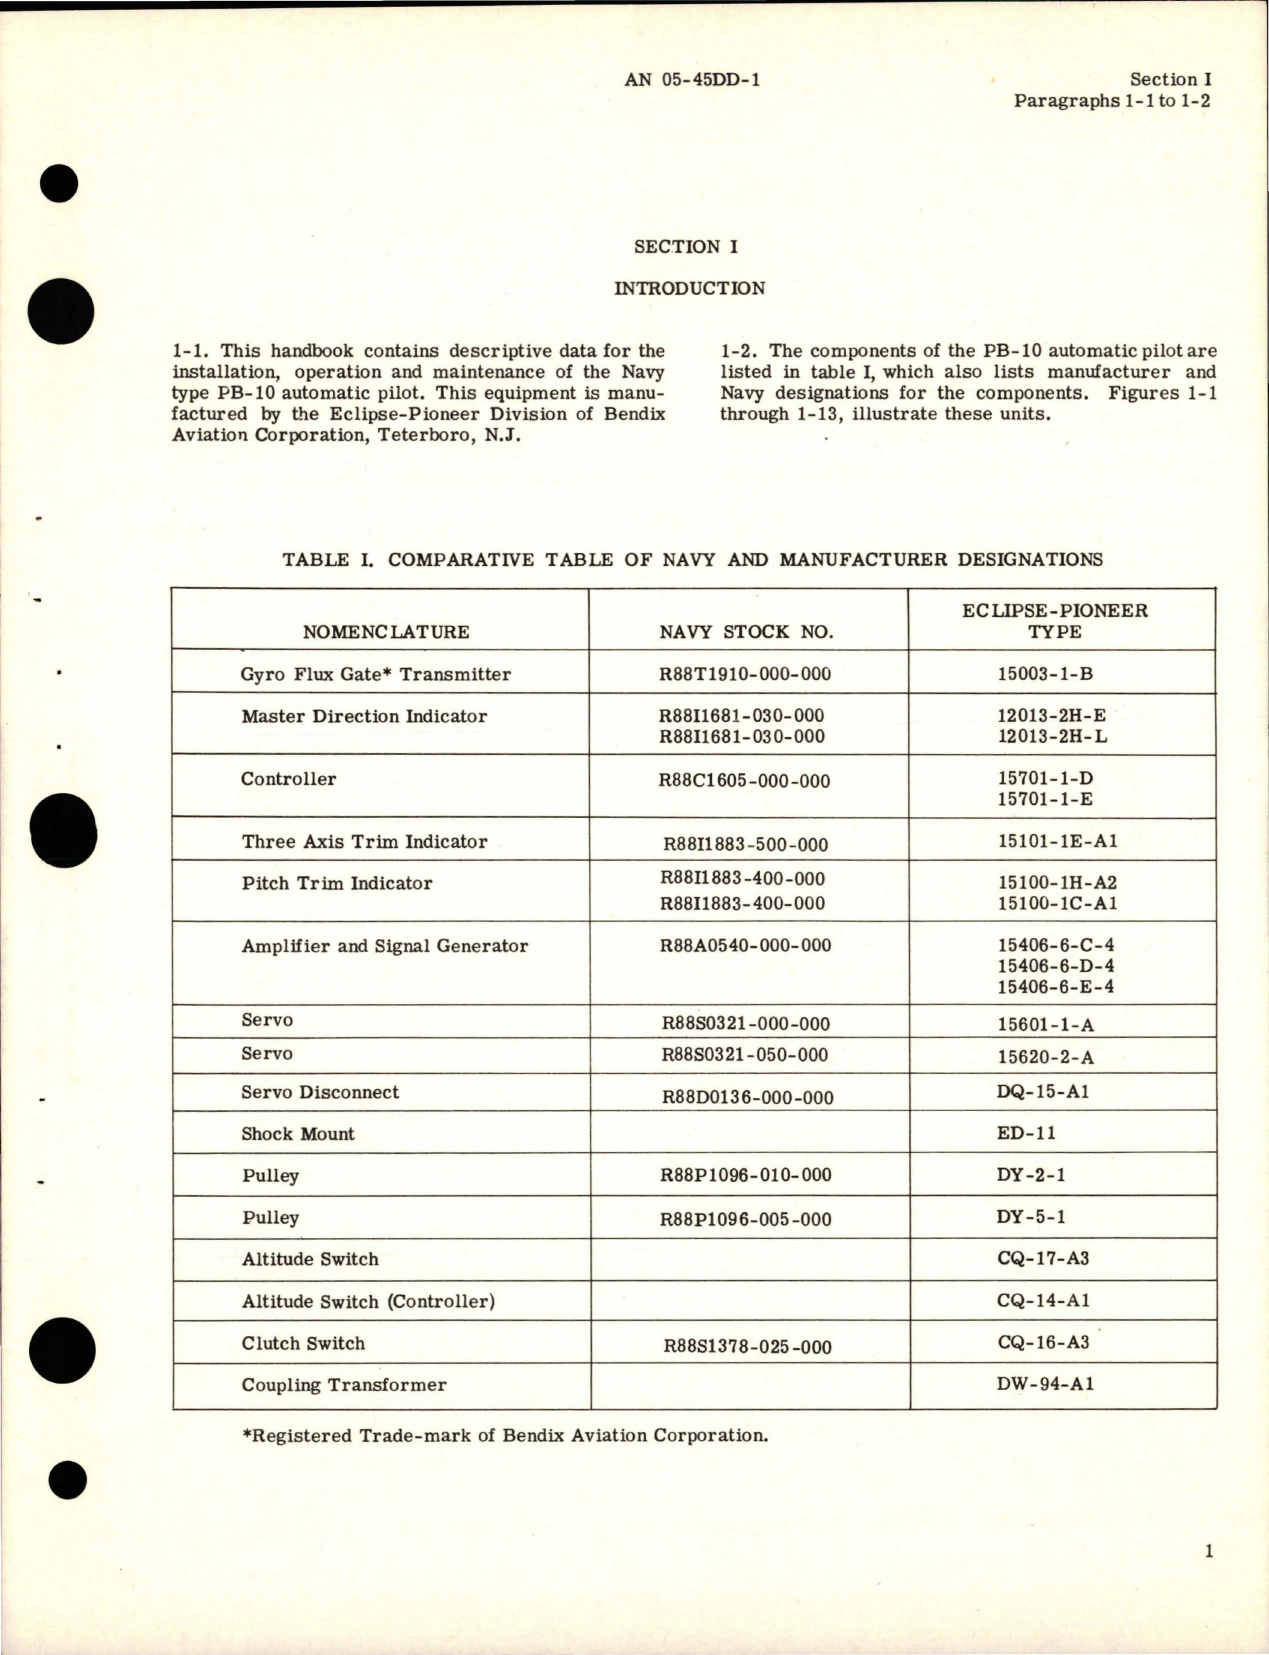 Sample page 7 from AirCorps Library document: Operation and Service Instructions for Automatic Pilot - PB-10